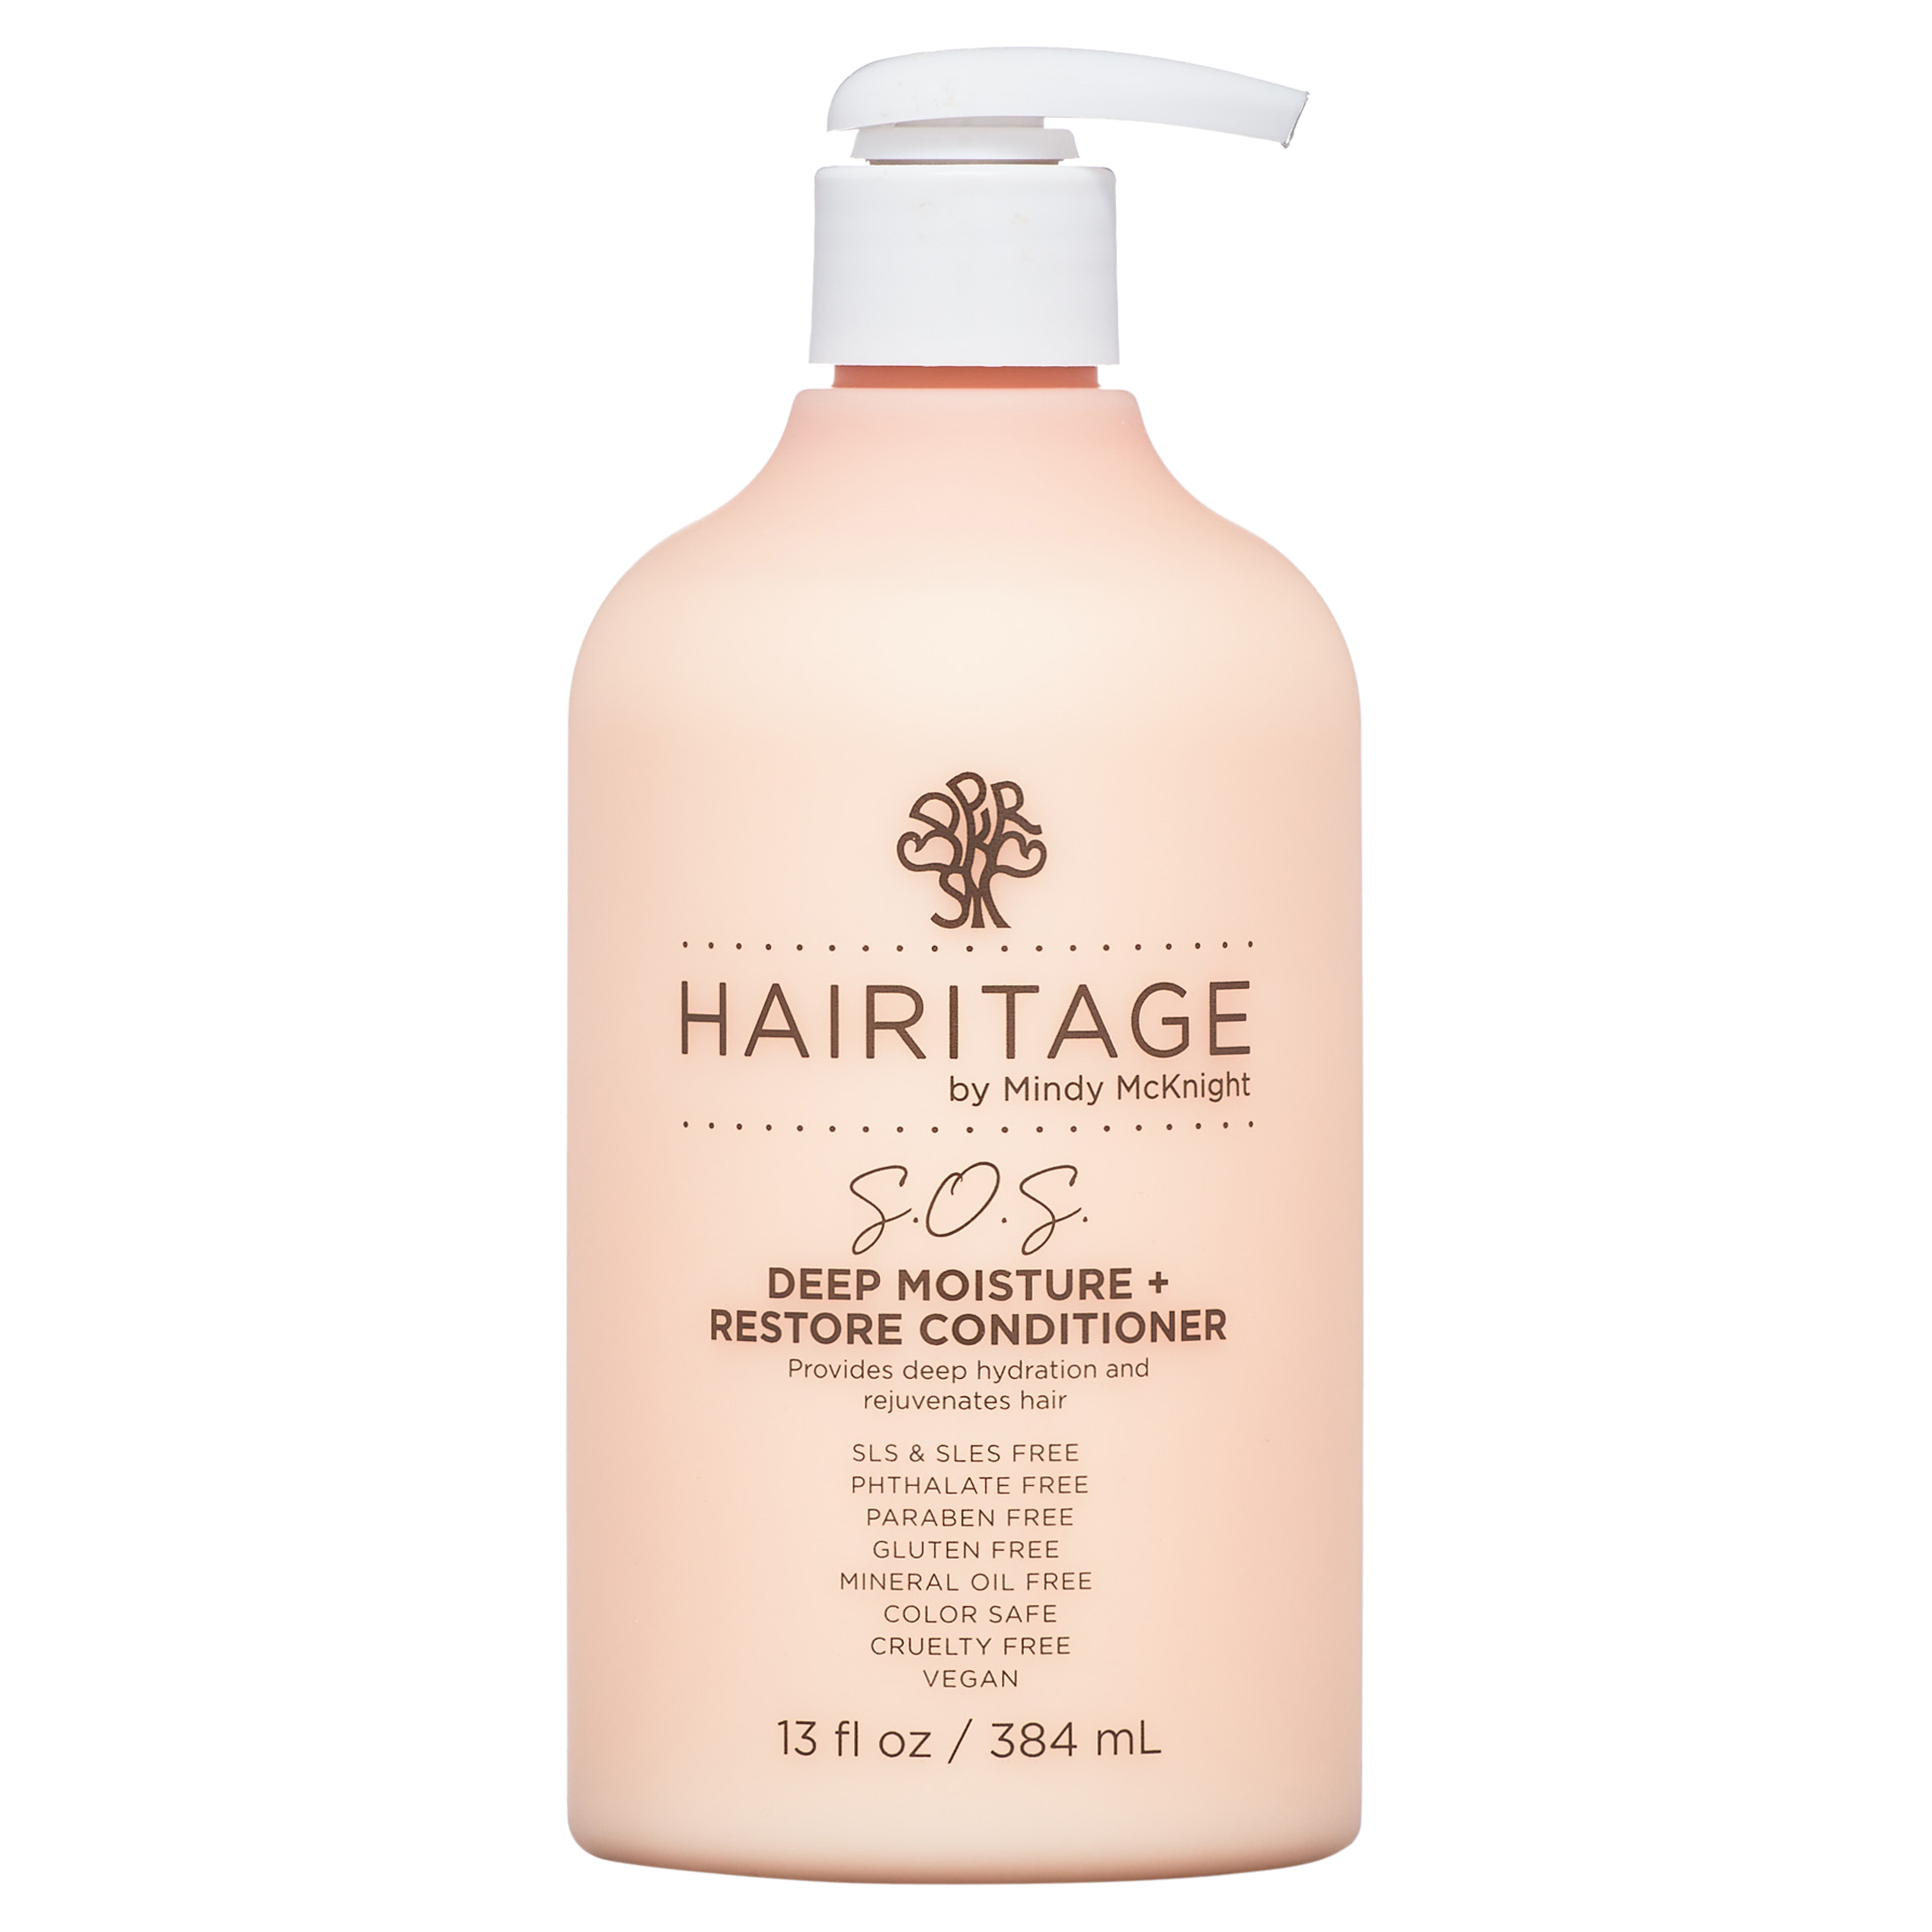 Hairitage S.O.S. Deep Moisture & Restore Deep Conditioner with Safflower Oil for Dry, Thick Hair | for Coily + Curly + Wavy Hair Types | Vegan for Women & Men, 13 fl. oz. - image 1 of 7